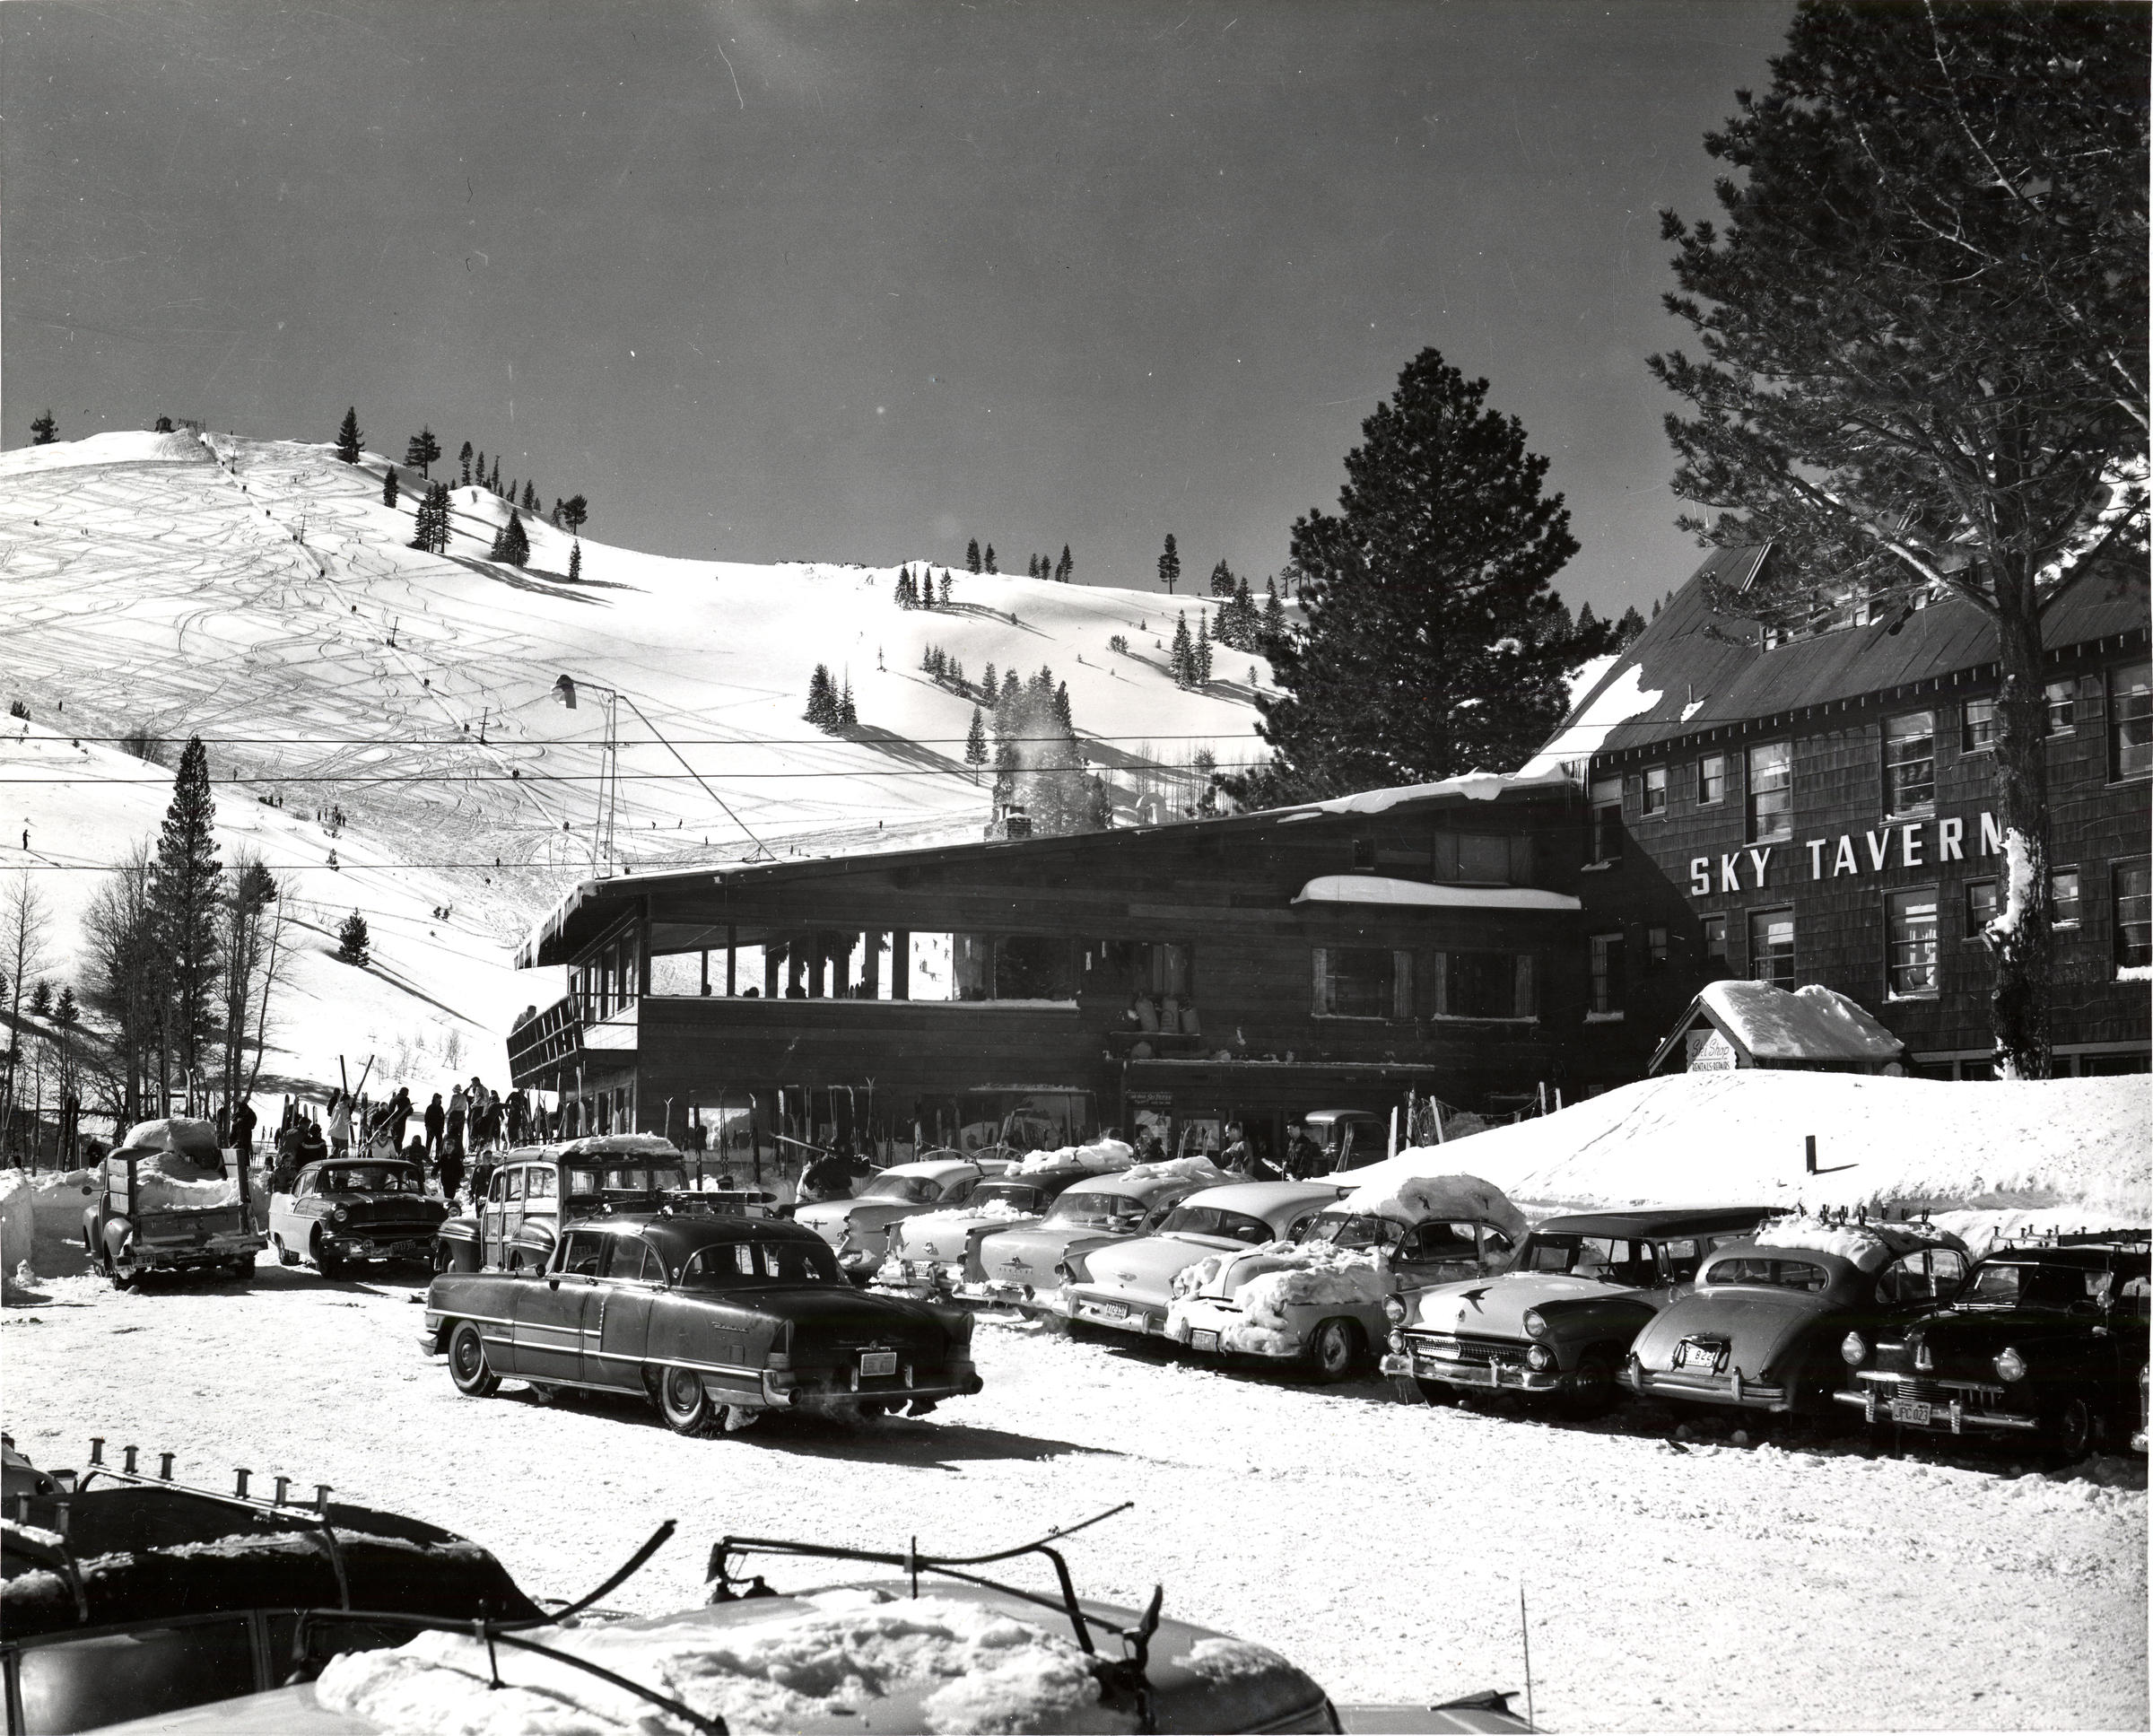 Sky Tavern In 1945: Running A Ski Resort Without Electricity | KUNR